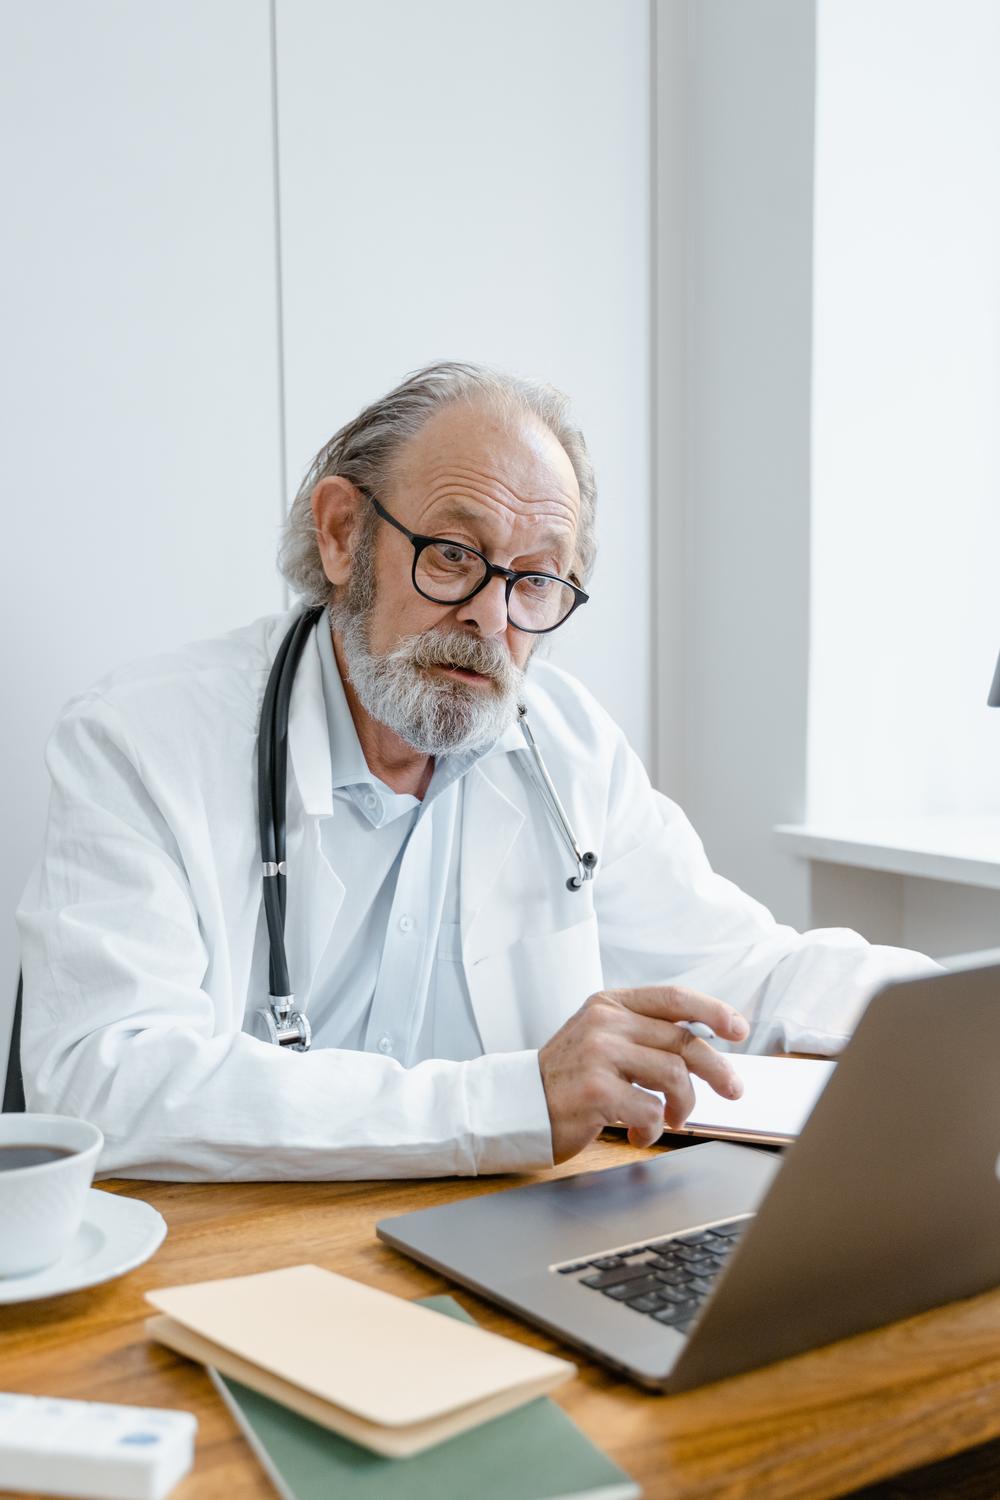 Older doctor on computer looking interested in what is on the screen.